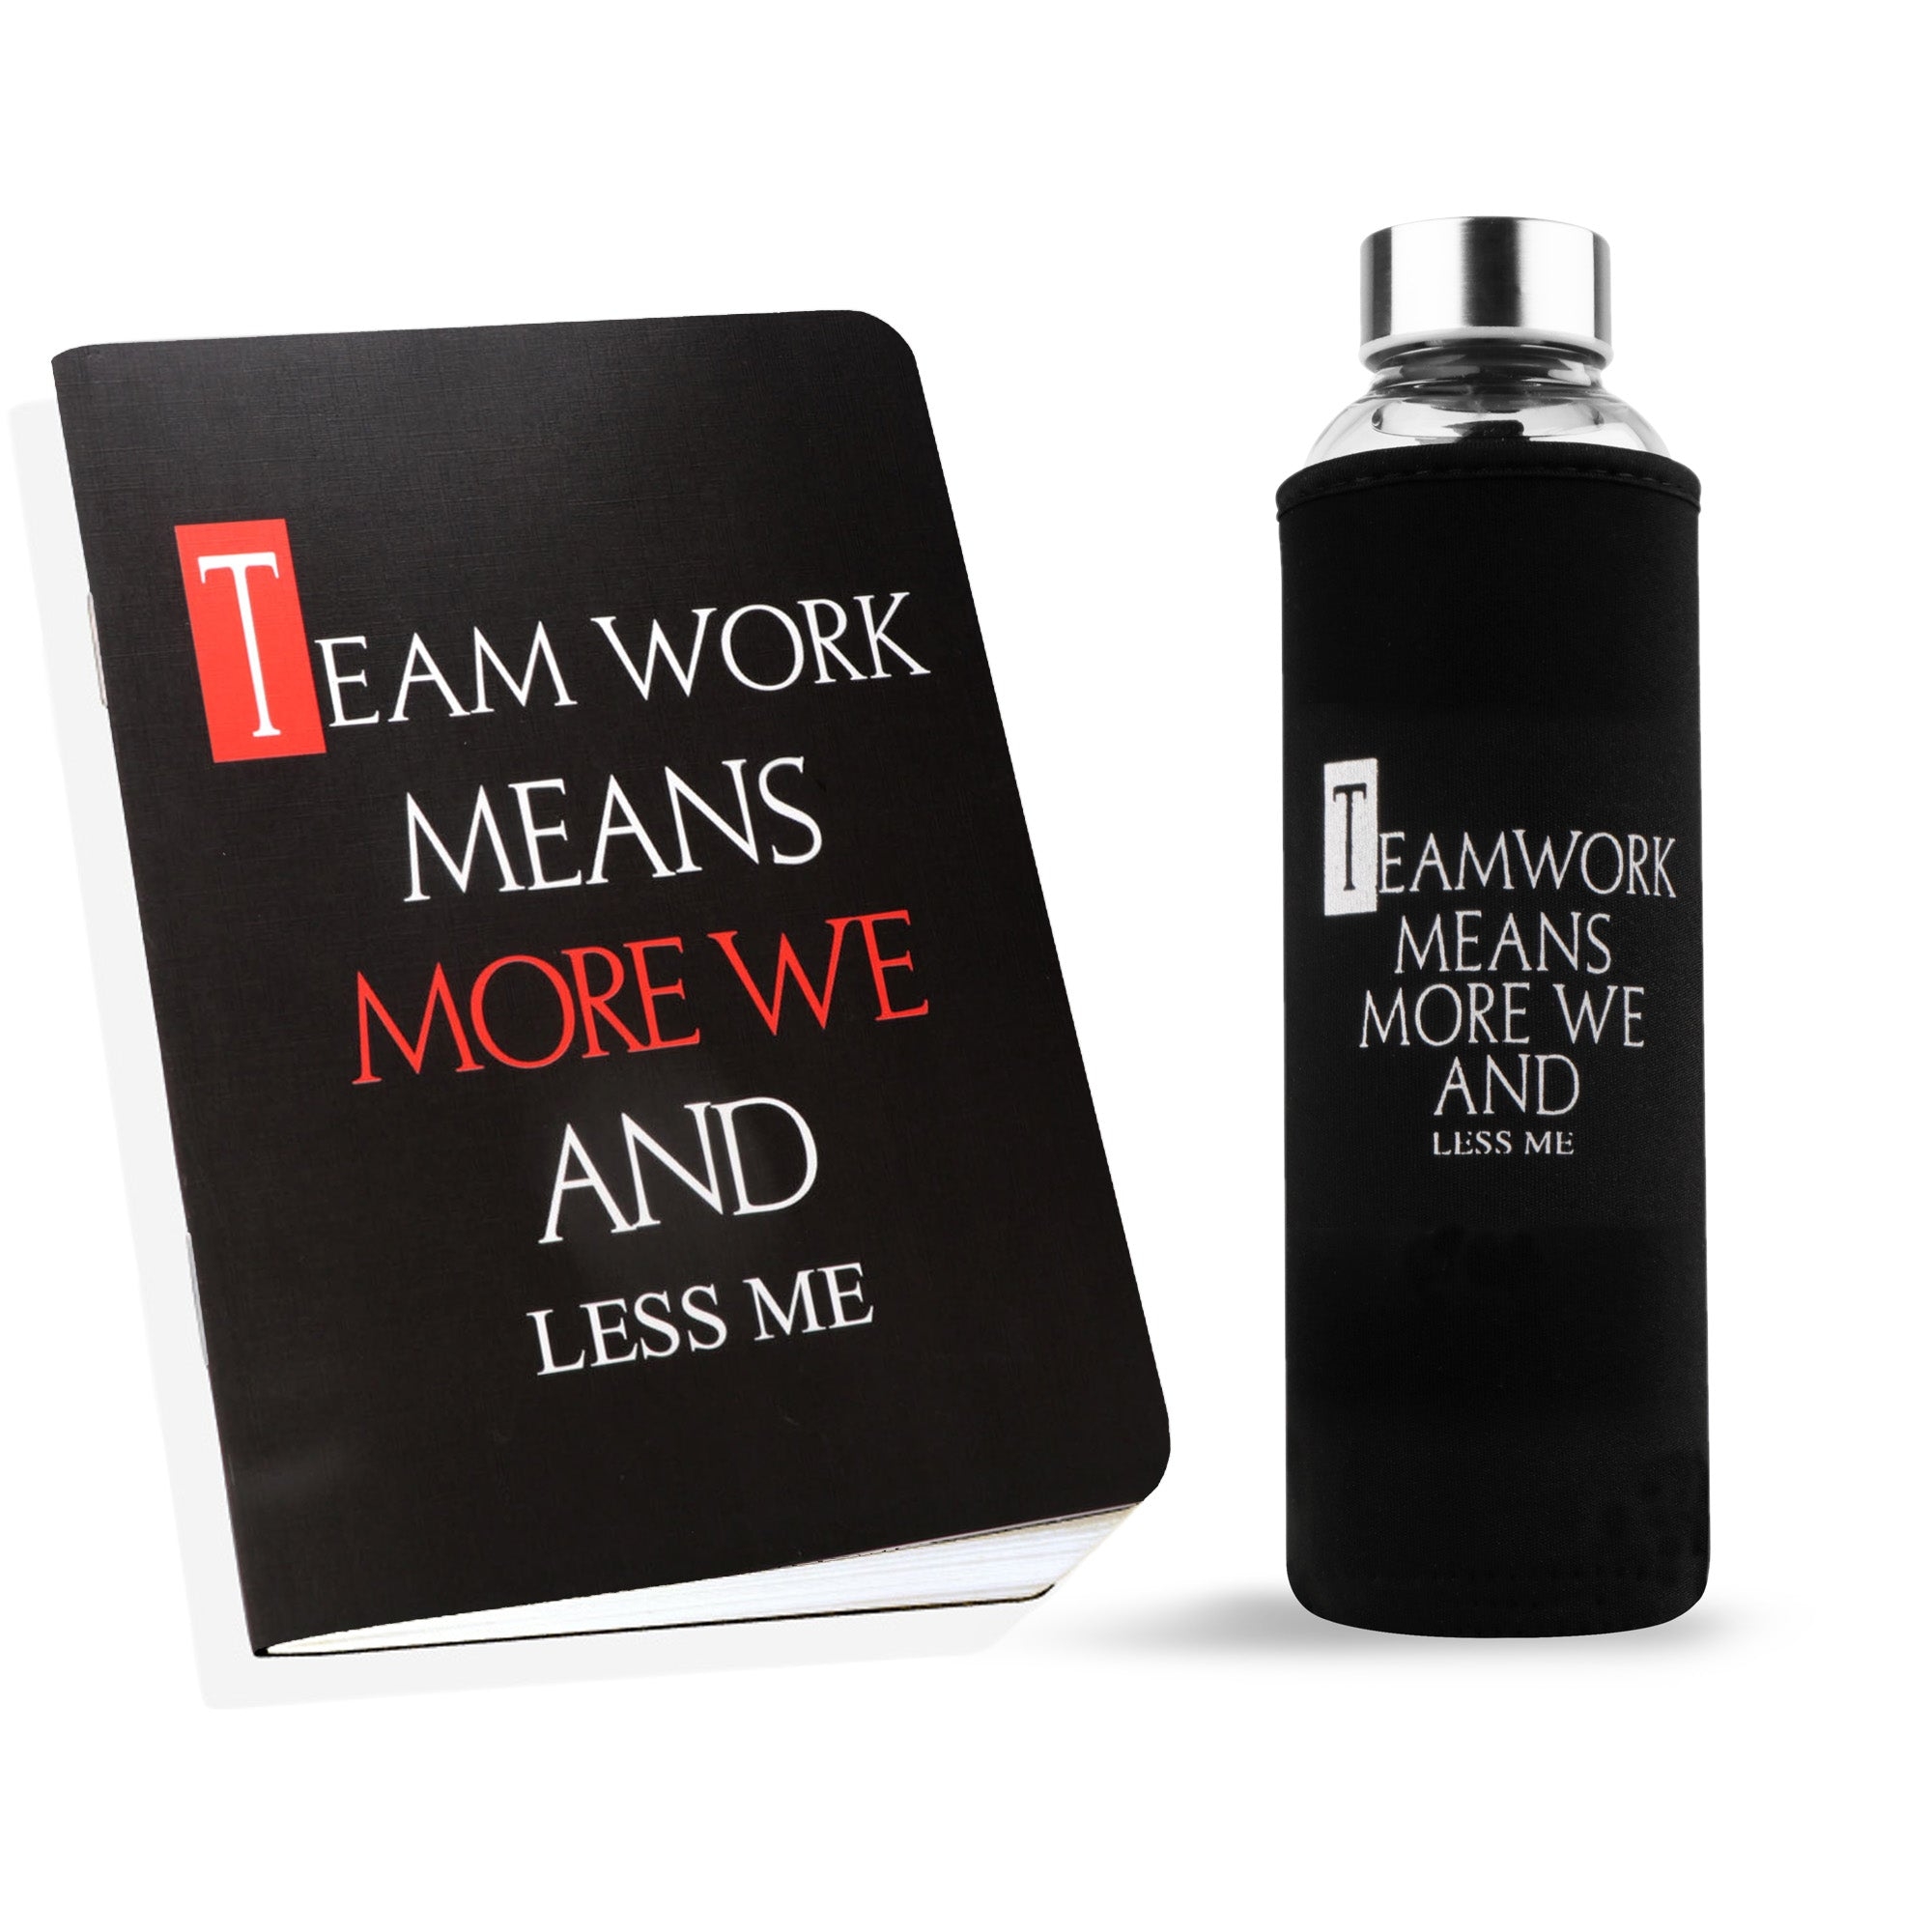 Archies Printed Glass Sipper Water Bottle With Protector Cover & Notebook combo with Corporate Quote Theme 